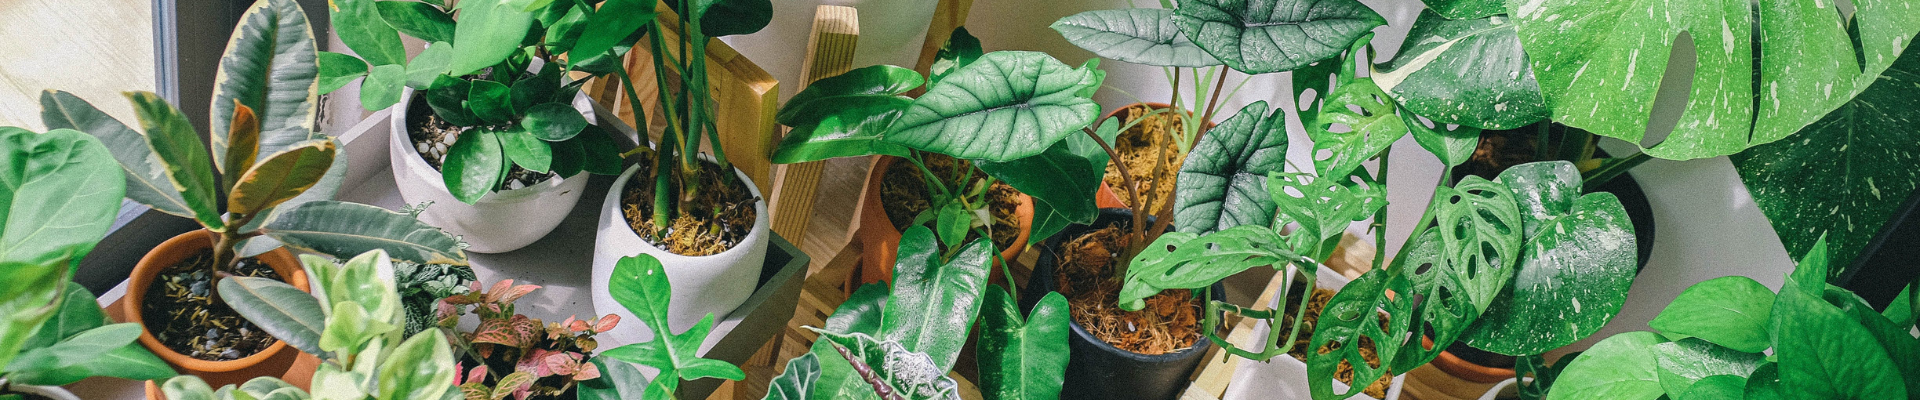 Winter is Here! A Guide to Nurturing Your Houseplants Through The Cozy, Chilly Months